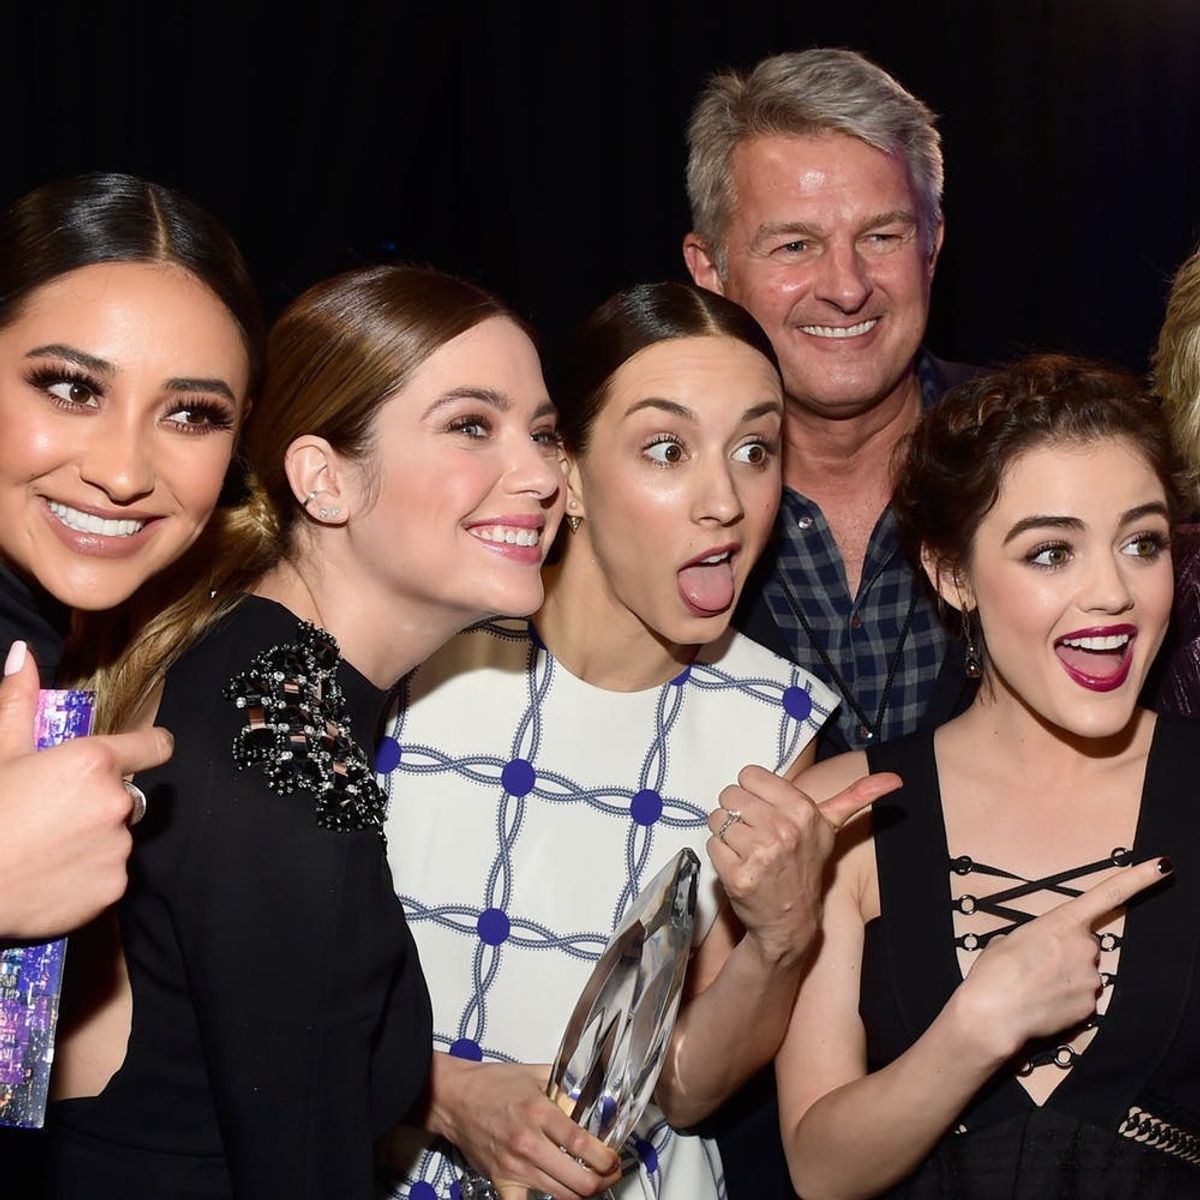 How “Pretty Little Liars” Stars Dealt With Hickeys for the Show